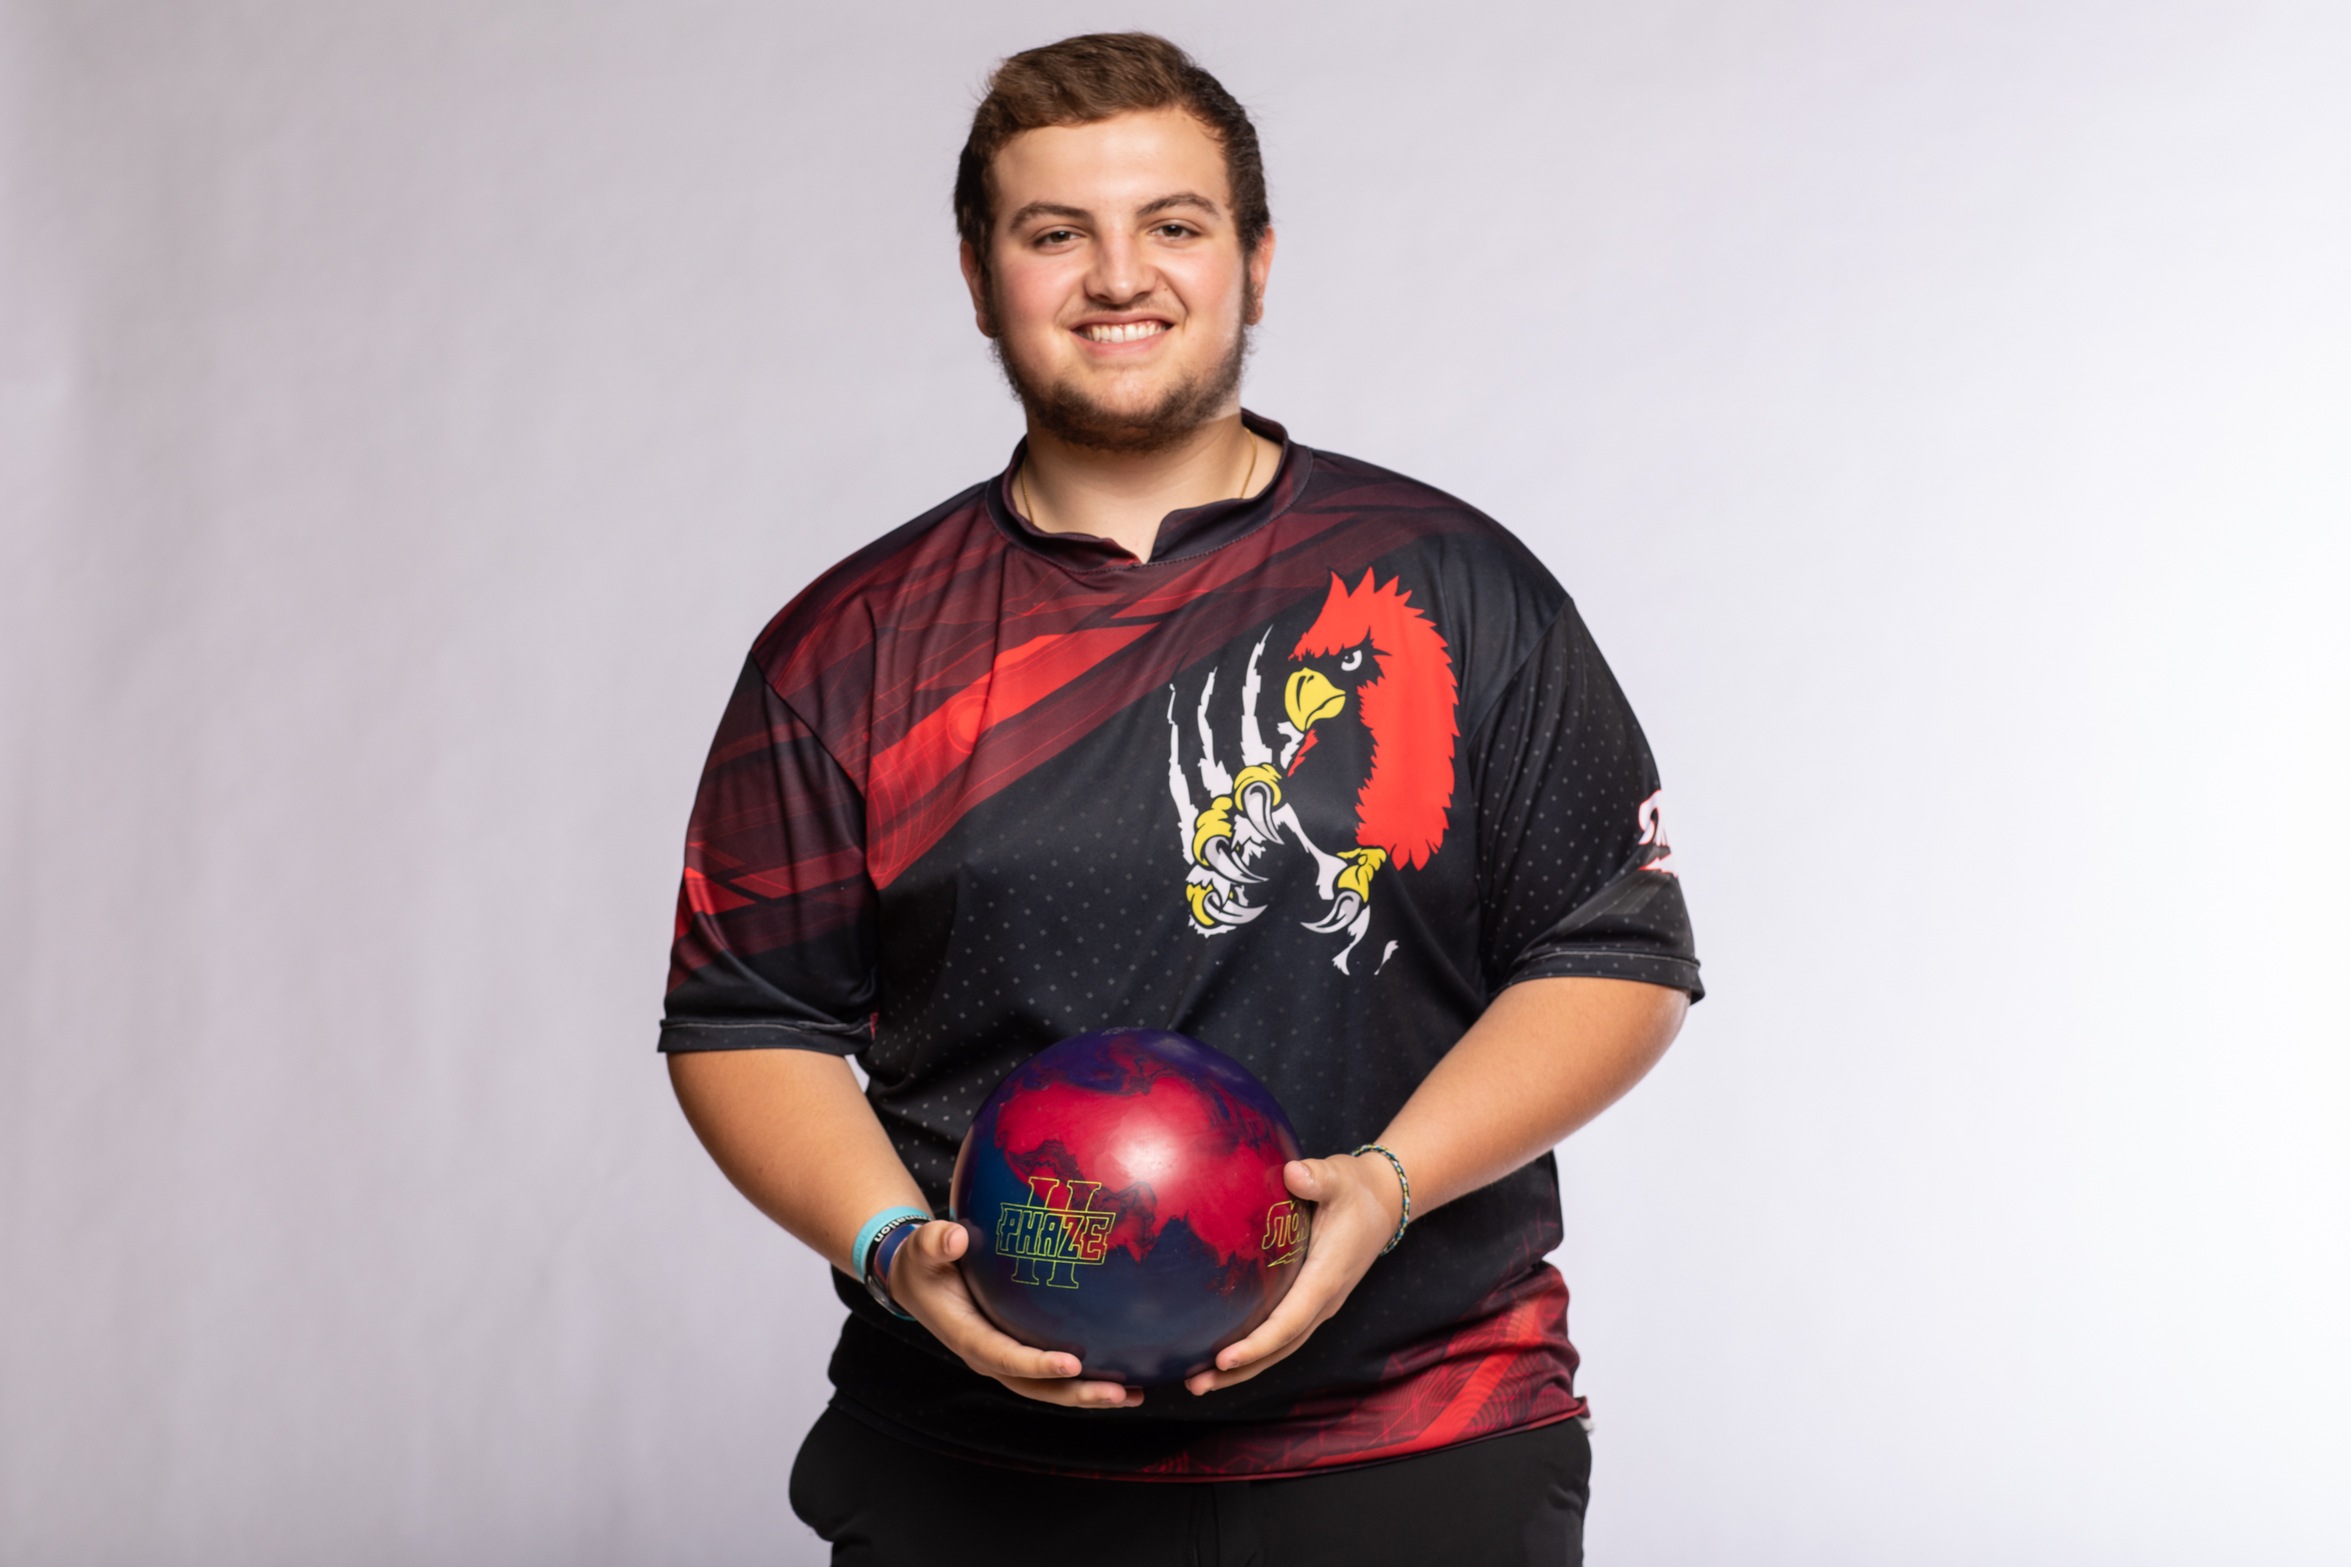 Men's Bowling places 14th at Hoosier Classic